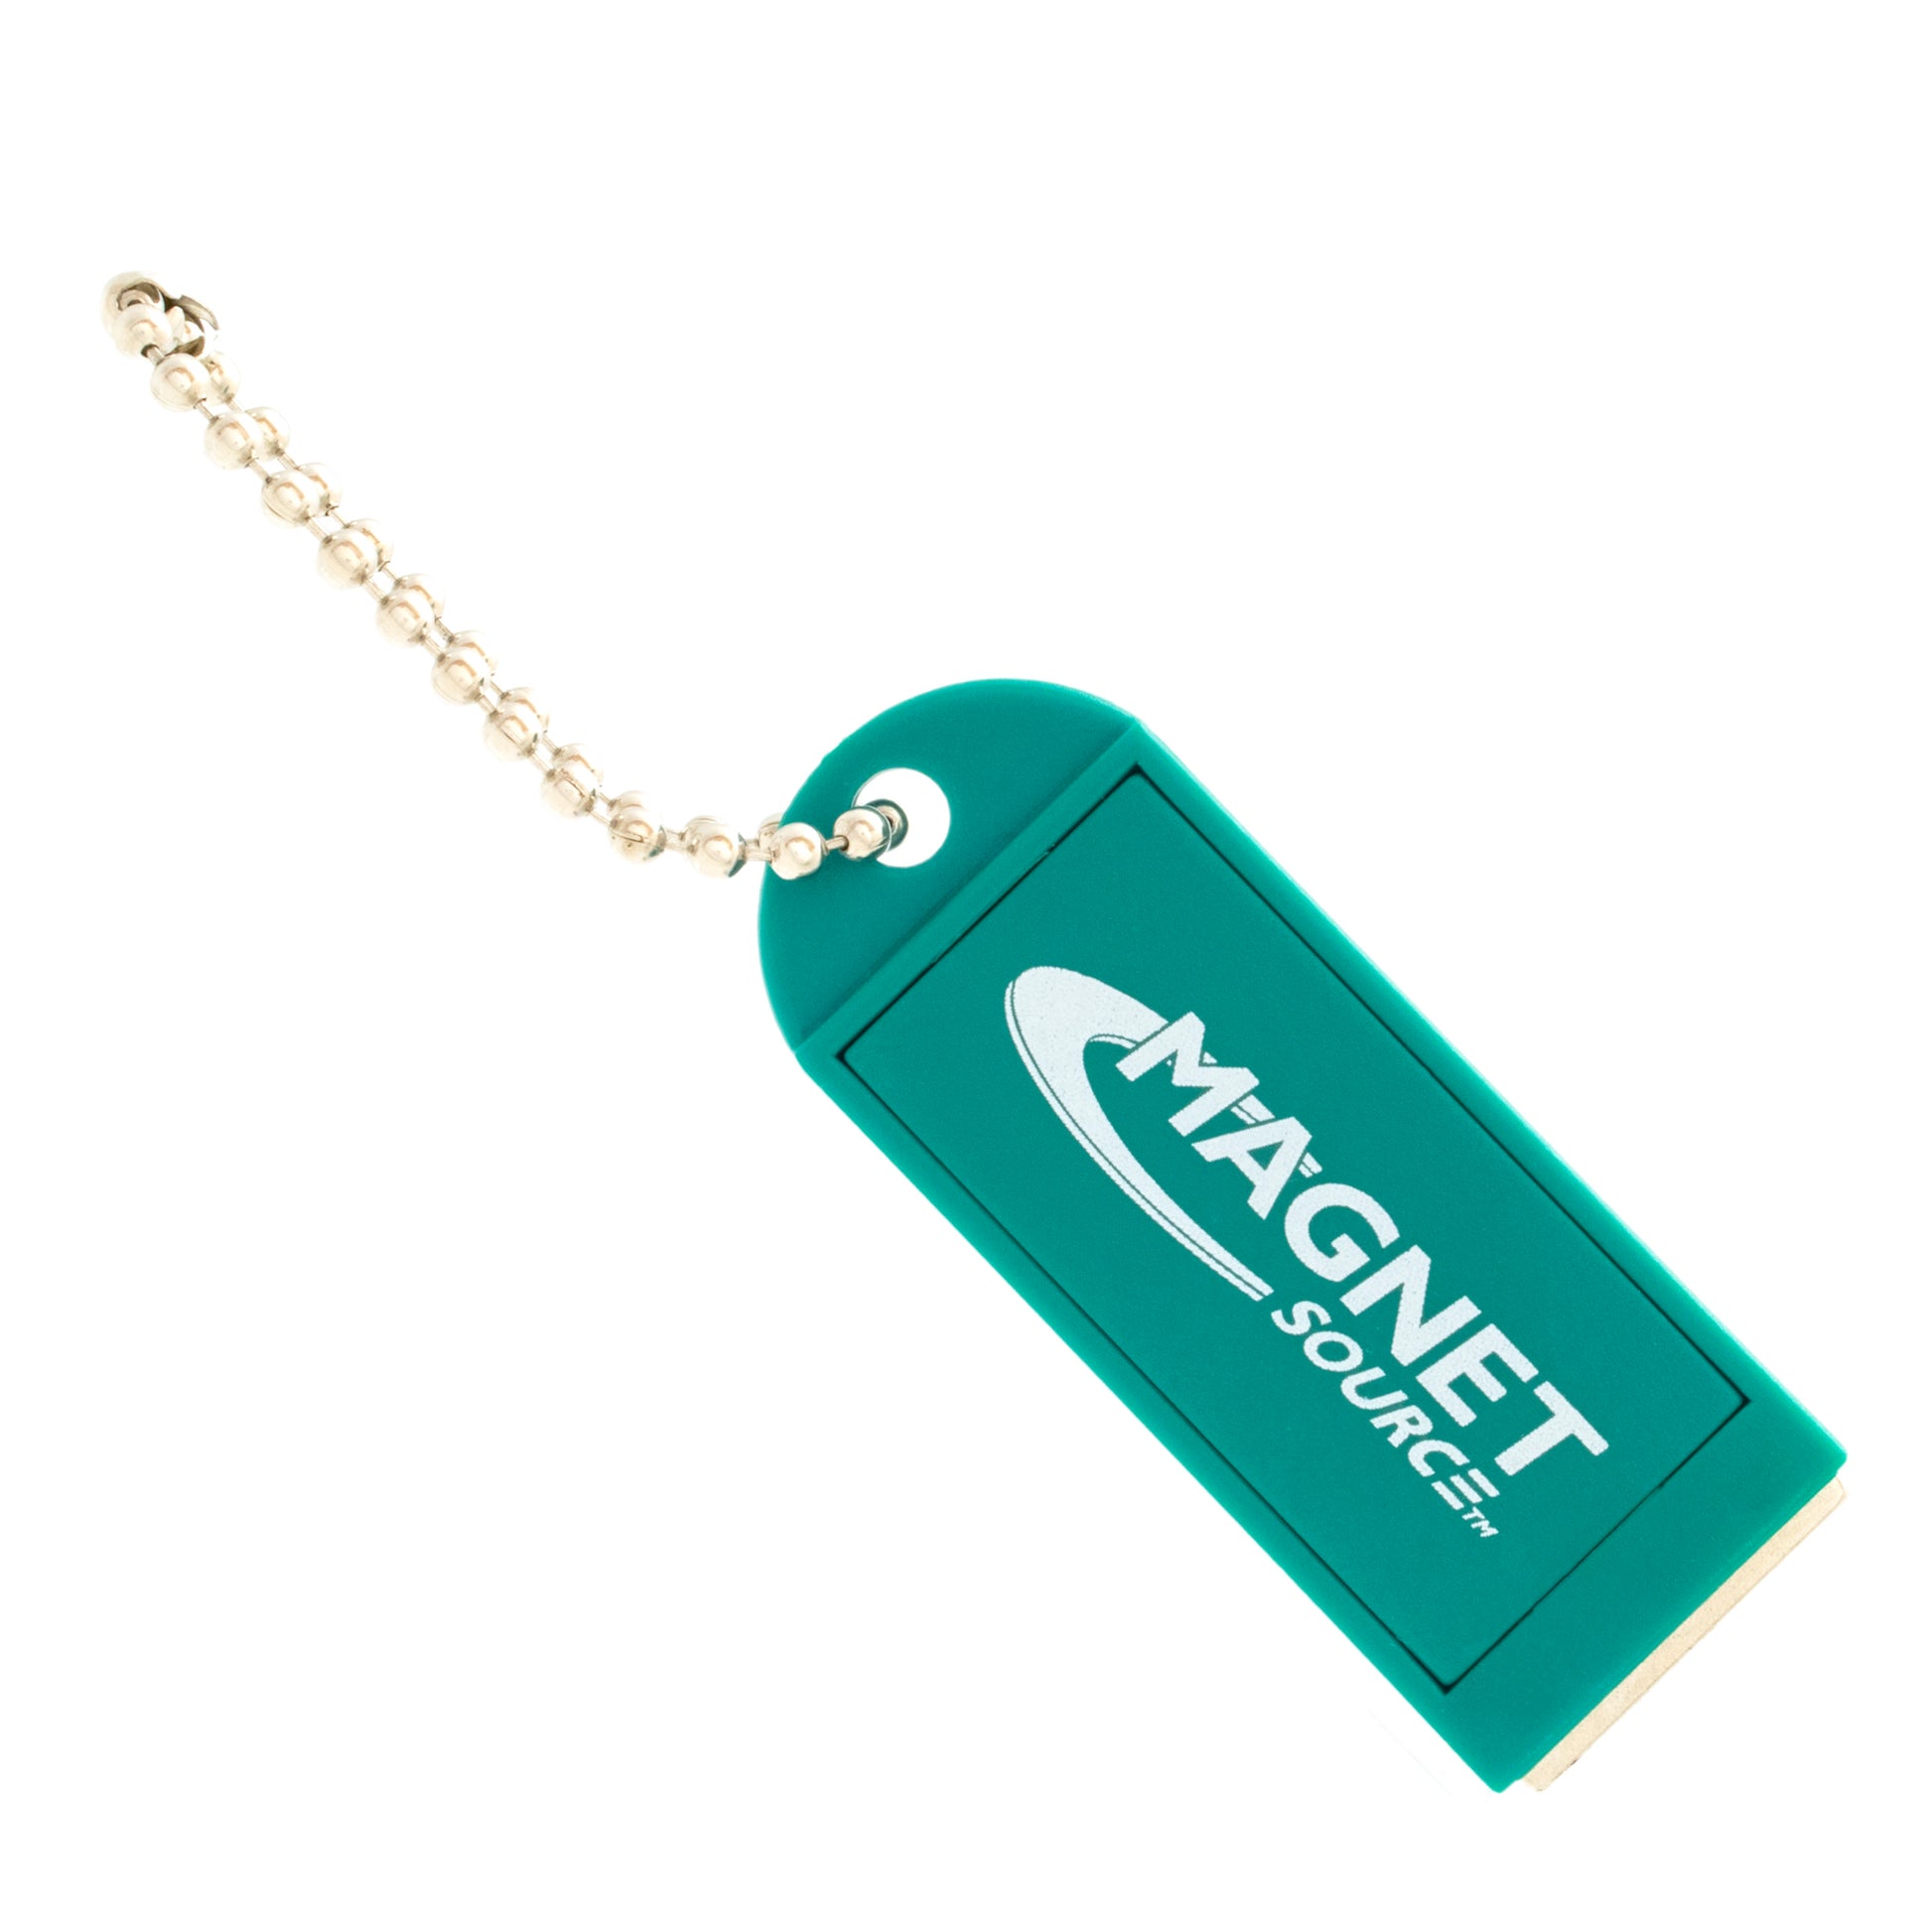 Load image into Gallery viewer, KCMG-BULK Neodymium Key Chain Magnet with Logo, Green - Back View